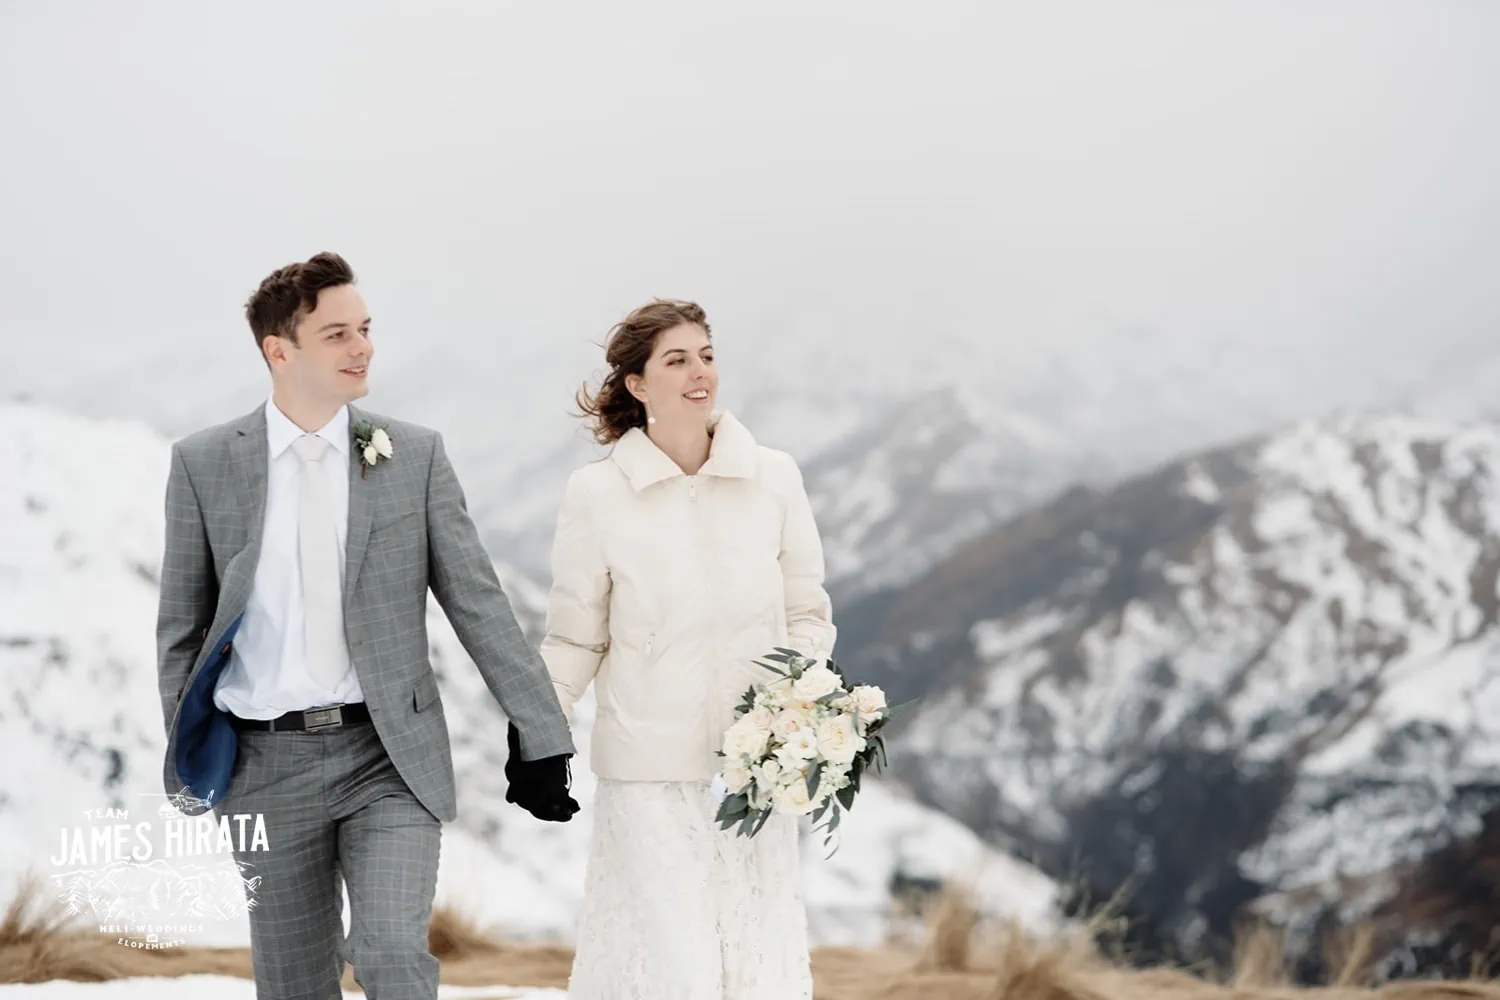 Regan & Jake's elopement wedding takes place on a snow-covered mountain in Queenstown.